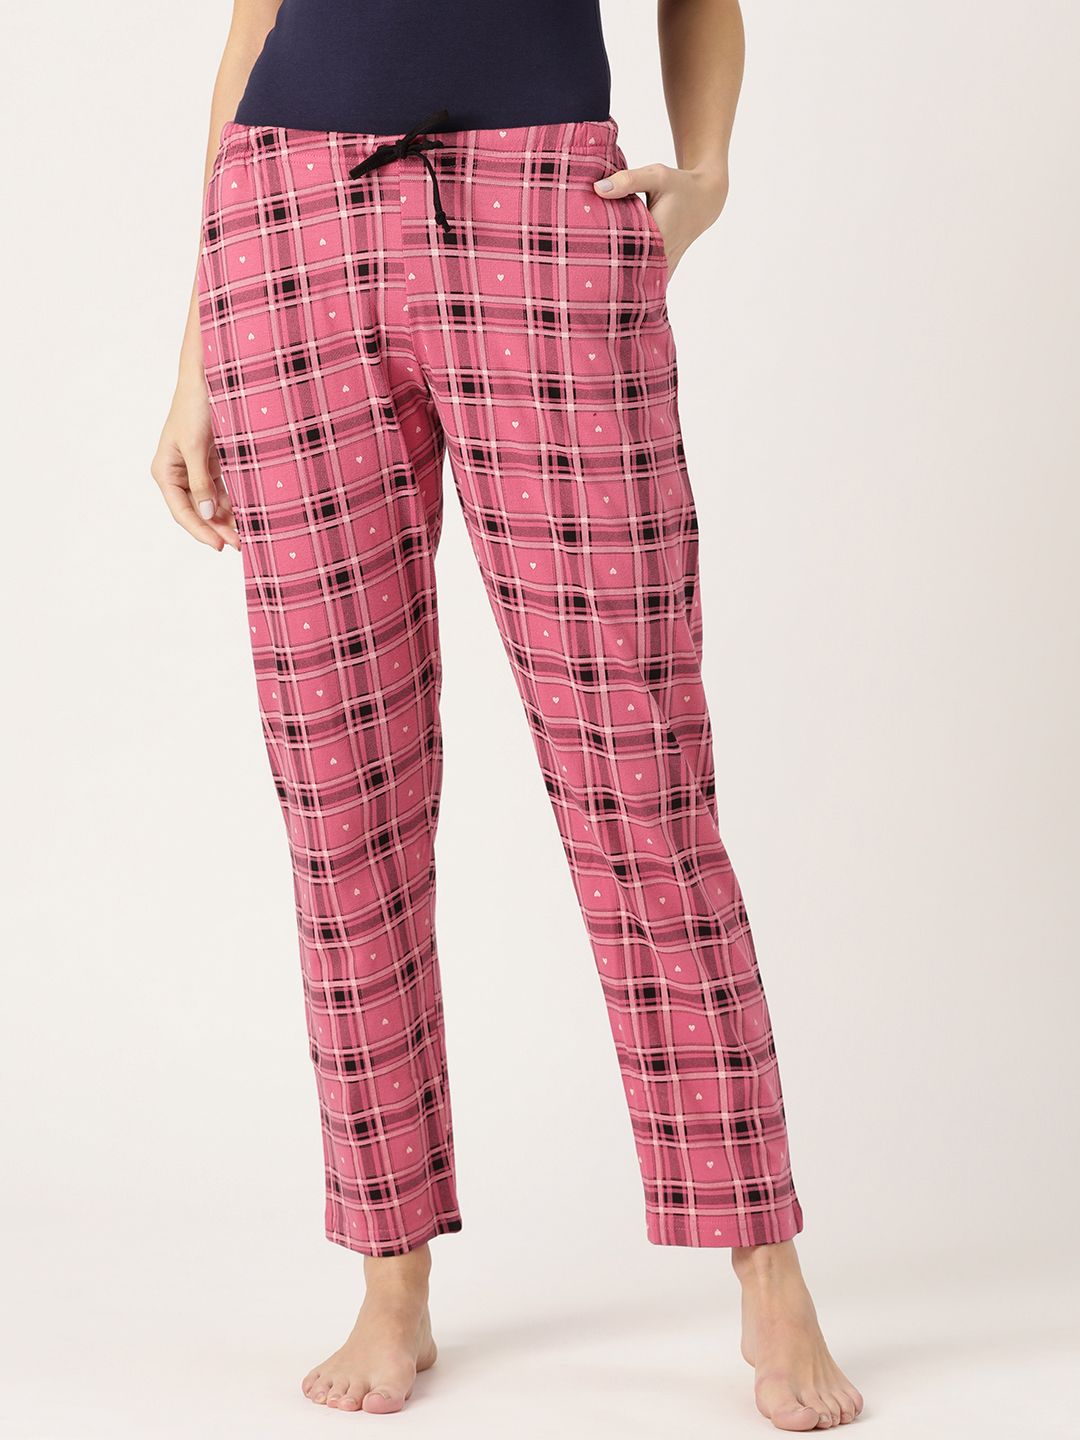 Kanvin Women Lime Pink & Black Checked Lounge Pants Price in India